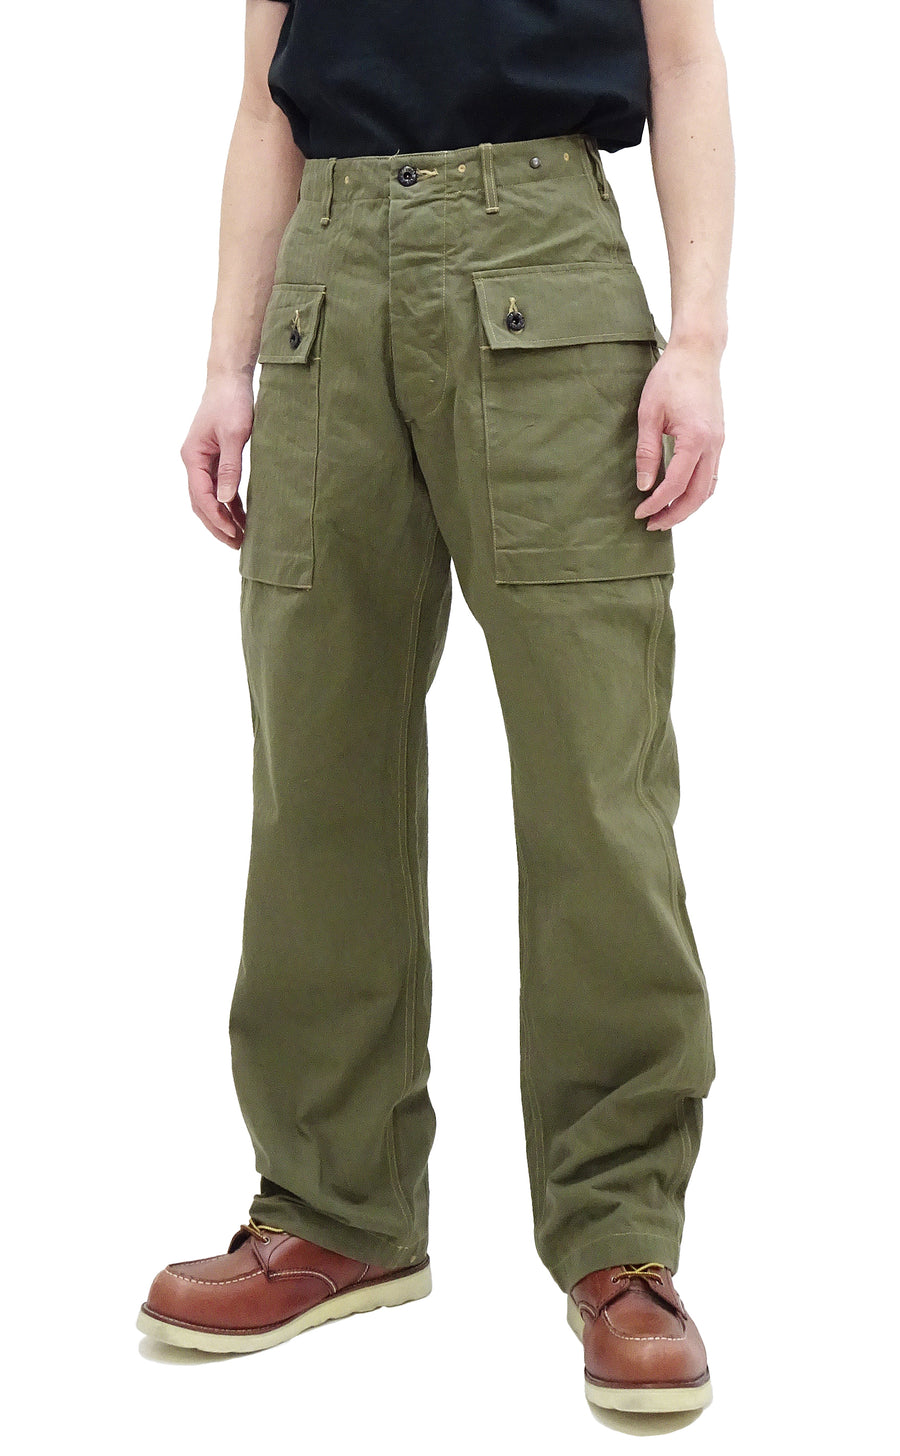 Mens cotton Multi Pocket Loose Straight Cargo Pants Casual Army Combat  Trousers | eBay